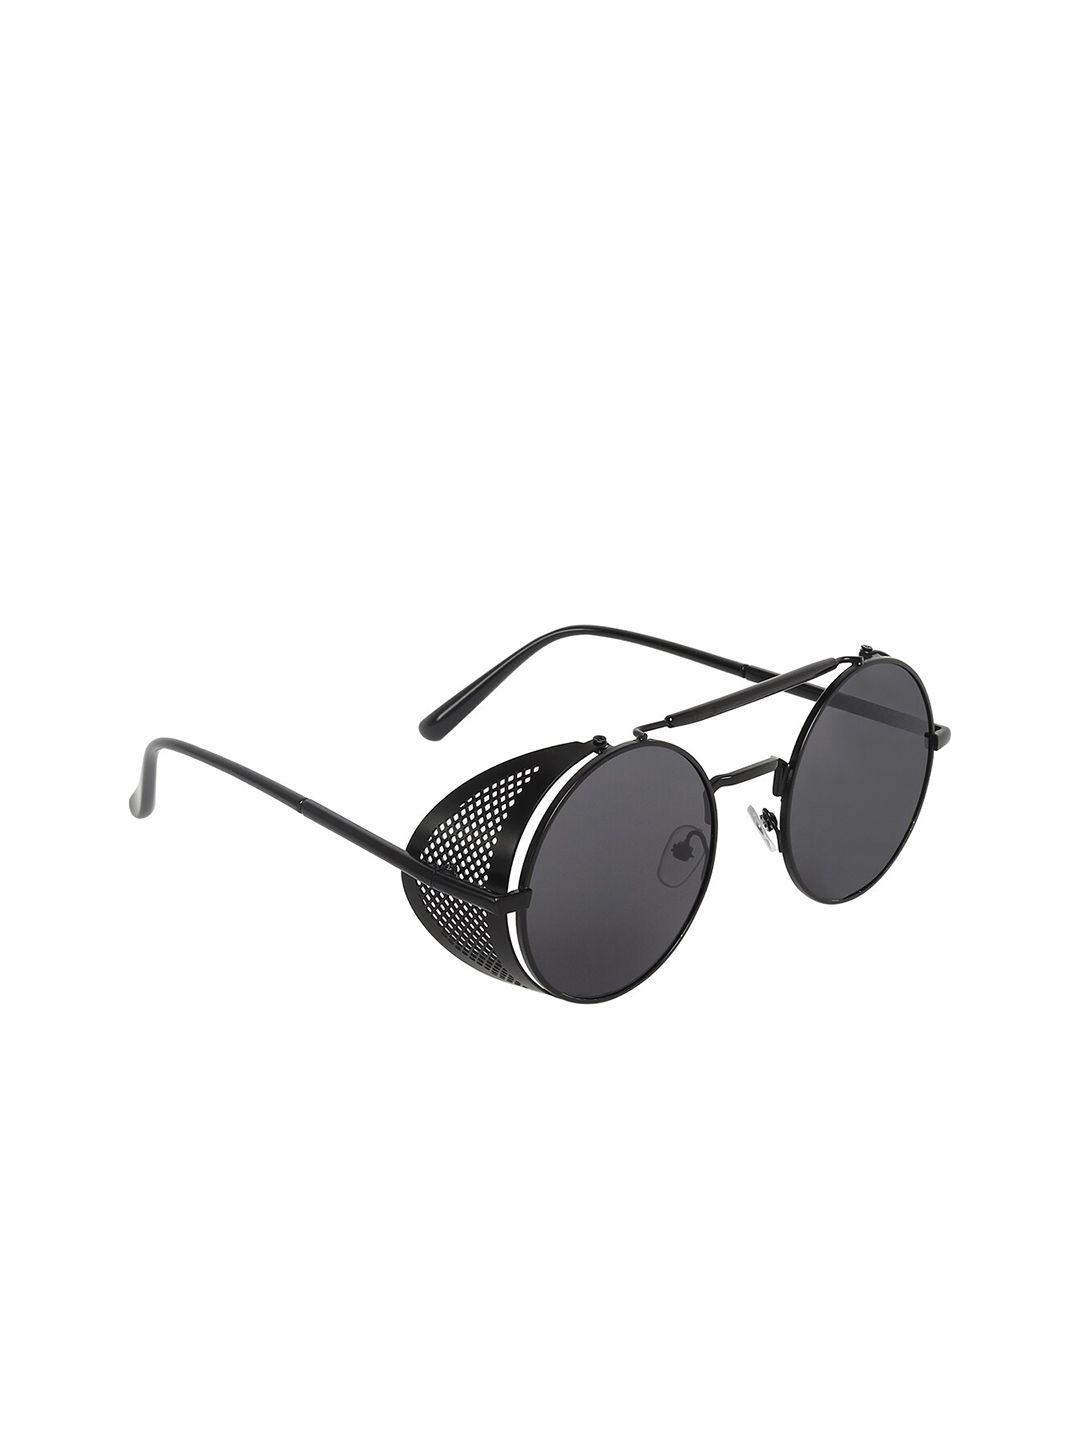 CRIBA Unisex Black Lens & Black Round Sunglasses with UV Protected Lens Price in India